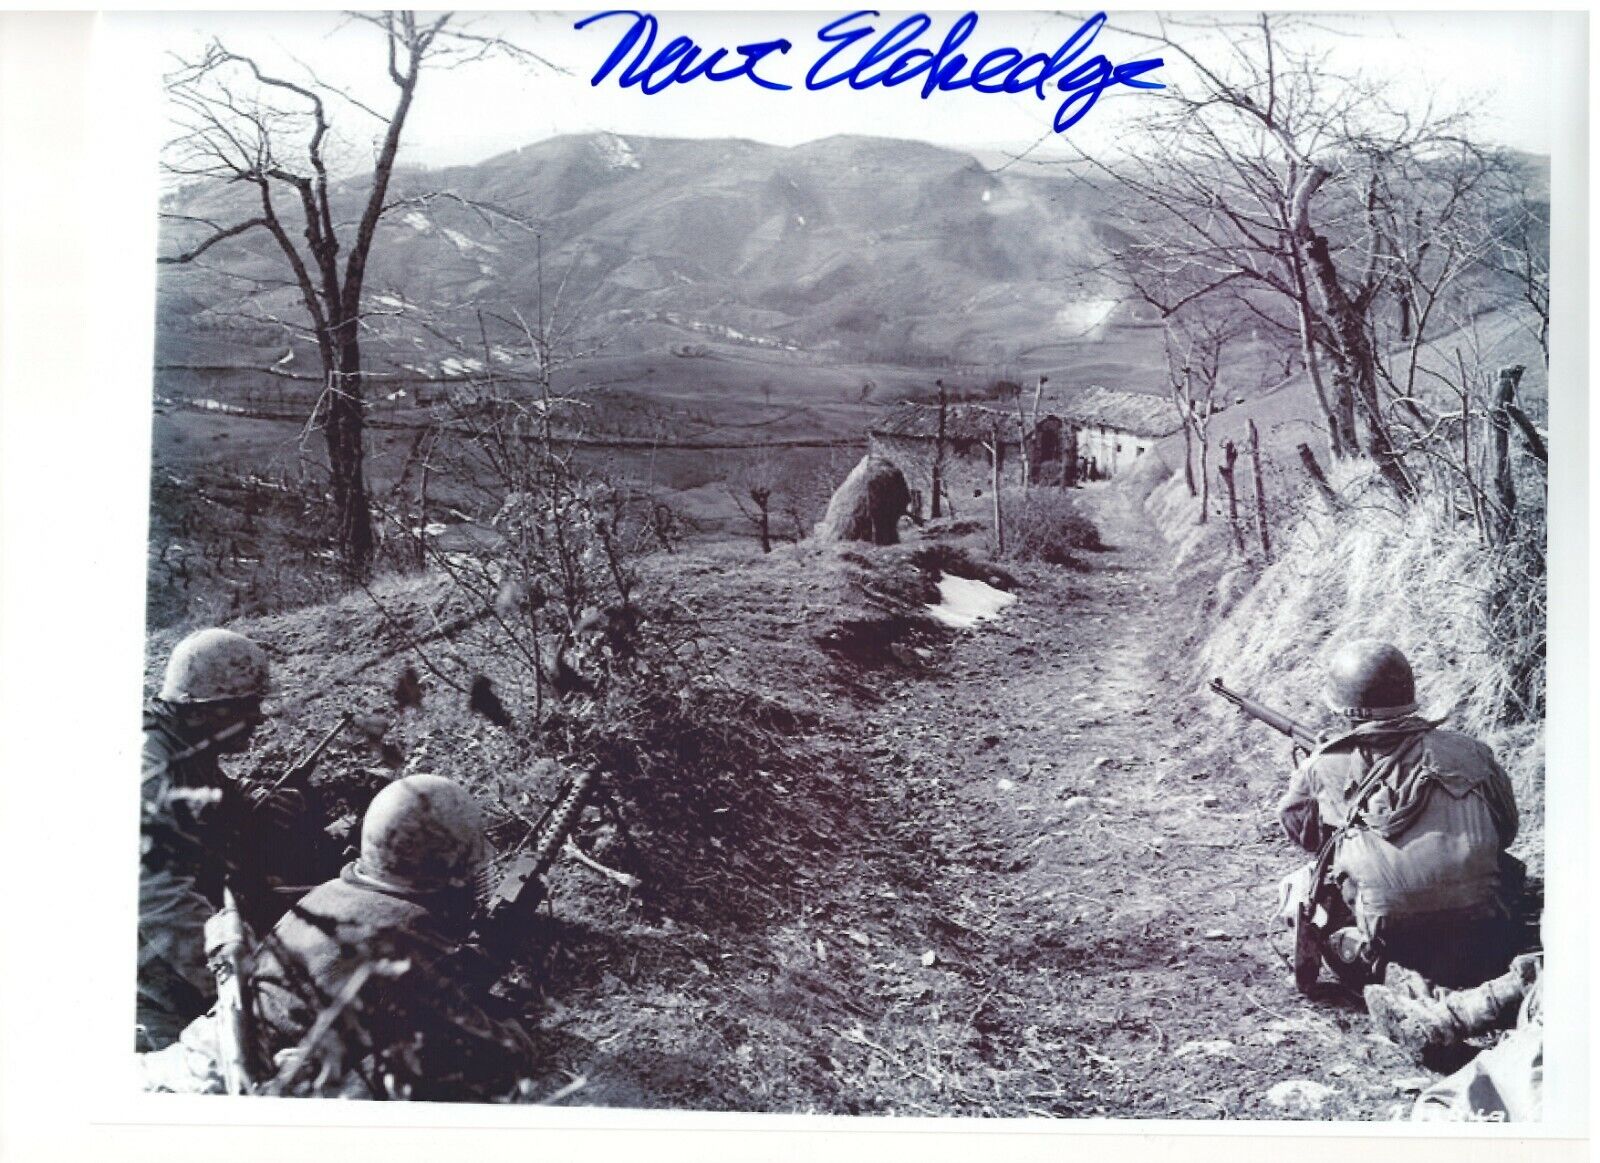 NEWC ELDREDGE 10TH MOUNTAIN DIVISION VETERAN RARE SIGNED Photo Poster painting